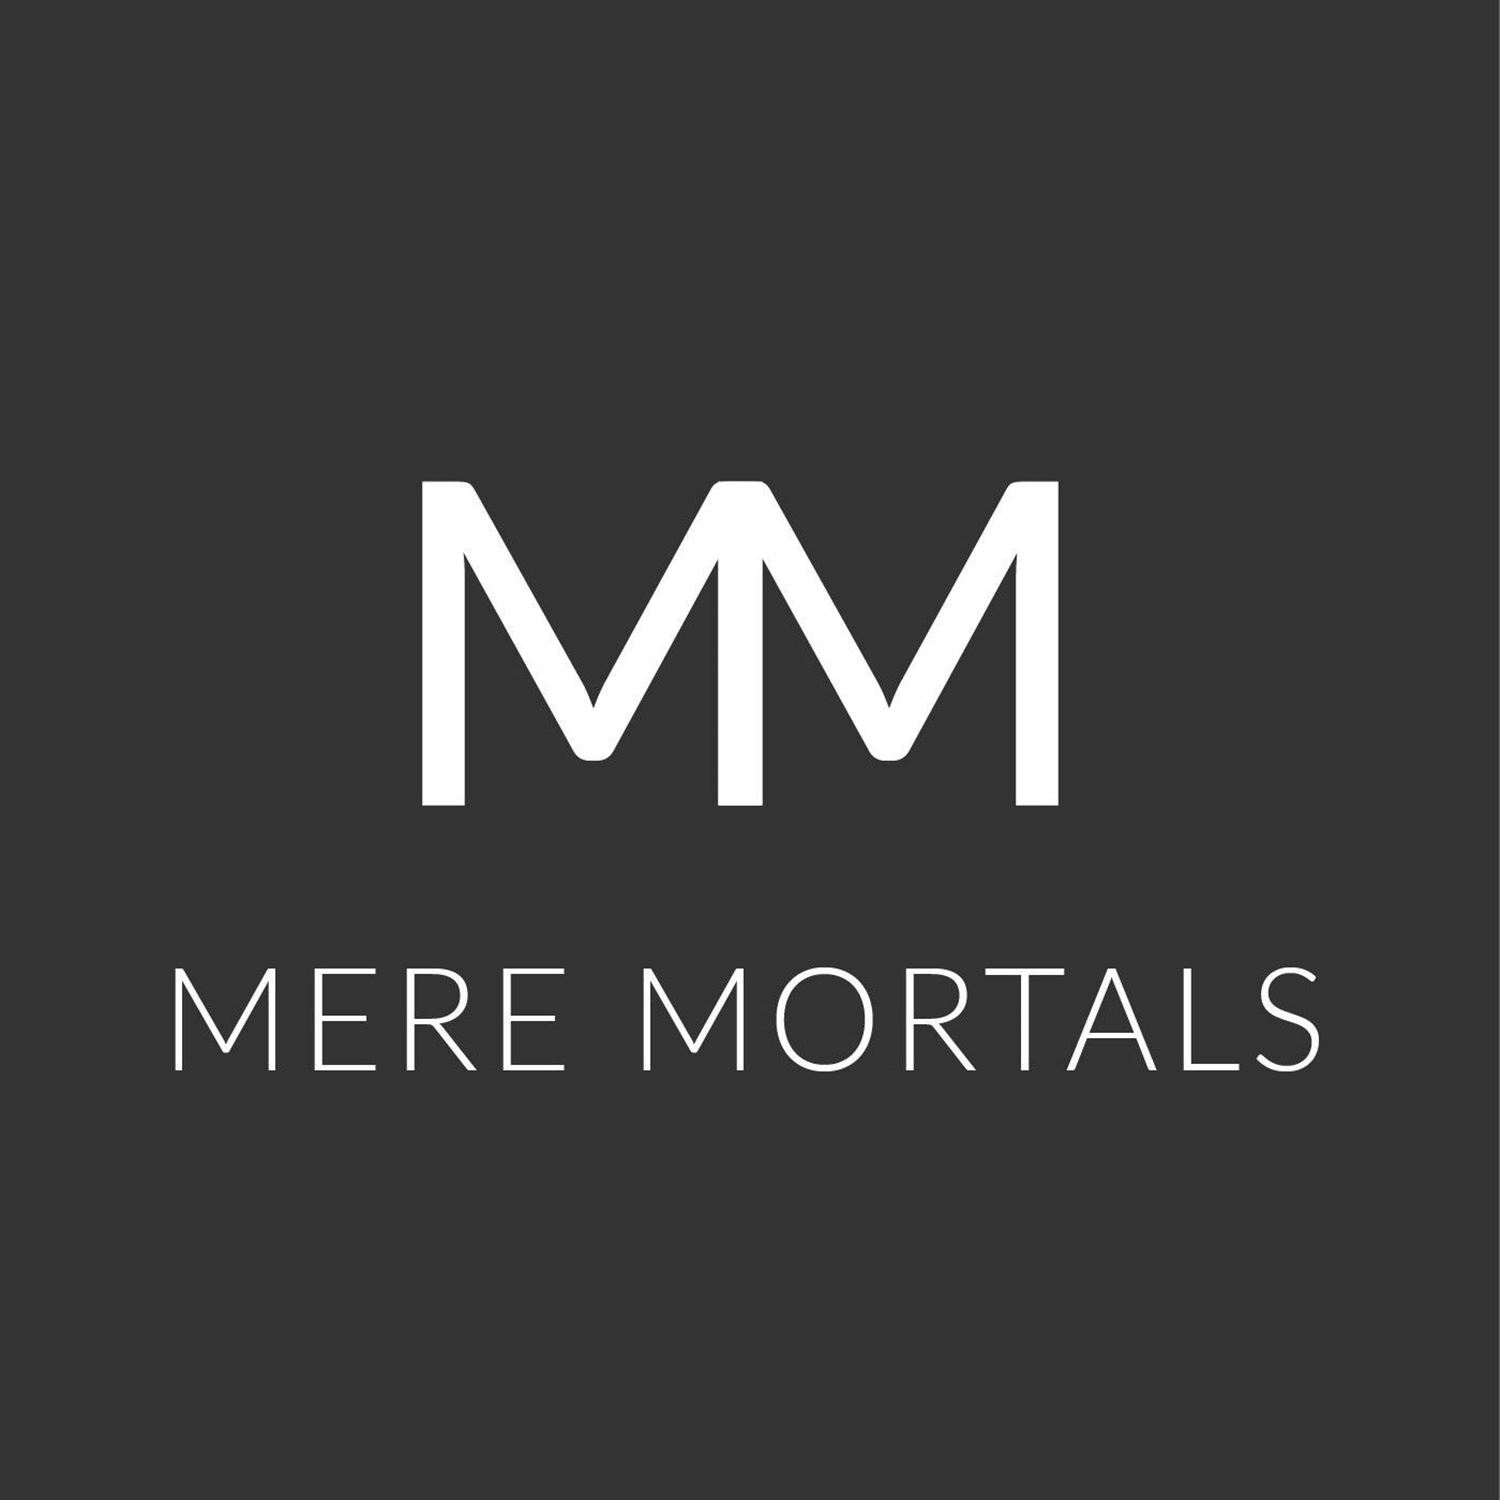 50,000,000 Subscribers & Fixing The Education System (Mere Mortals Episode #53 - Meanderings)